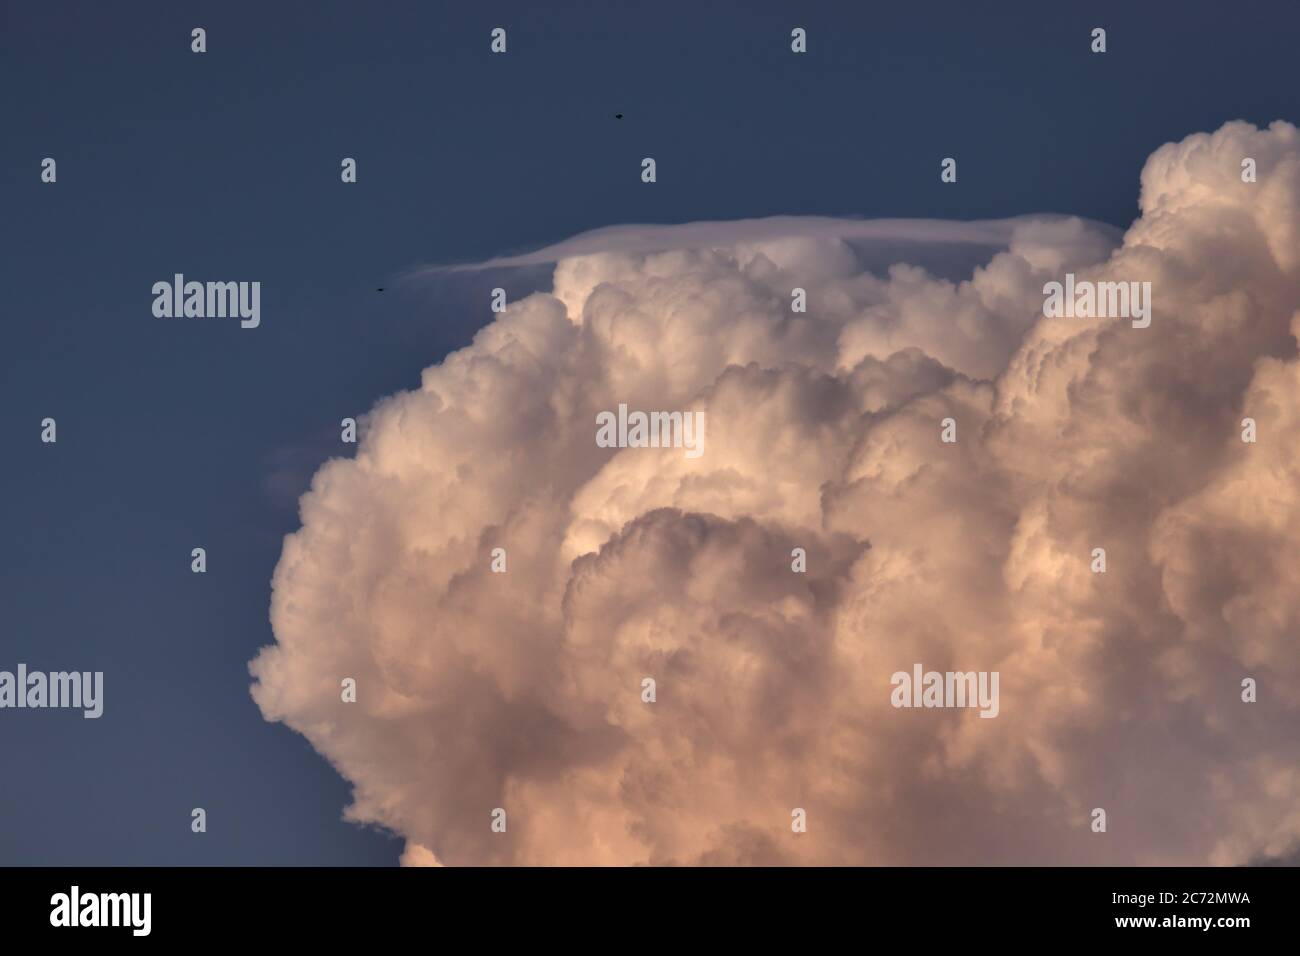 Large white Cumulus cloud with pileu, rising under a misty blue sky. Stock Photo